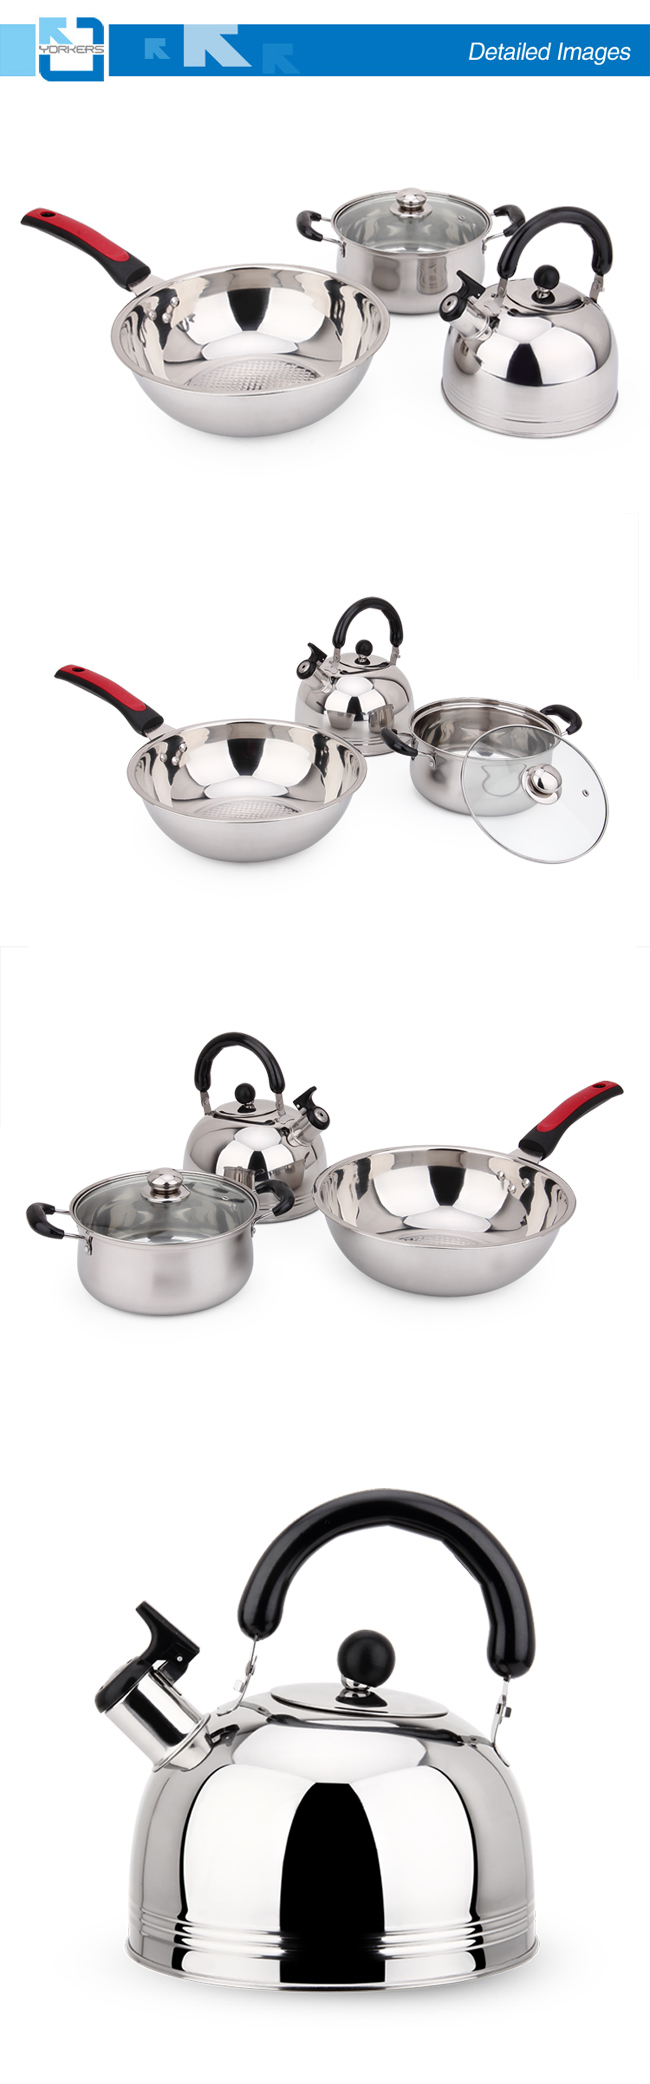 High Quality Stainless Steel Cookware Set with Kettle & Stock Pot & Fry Pan